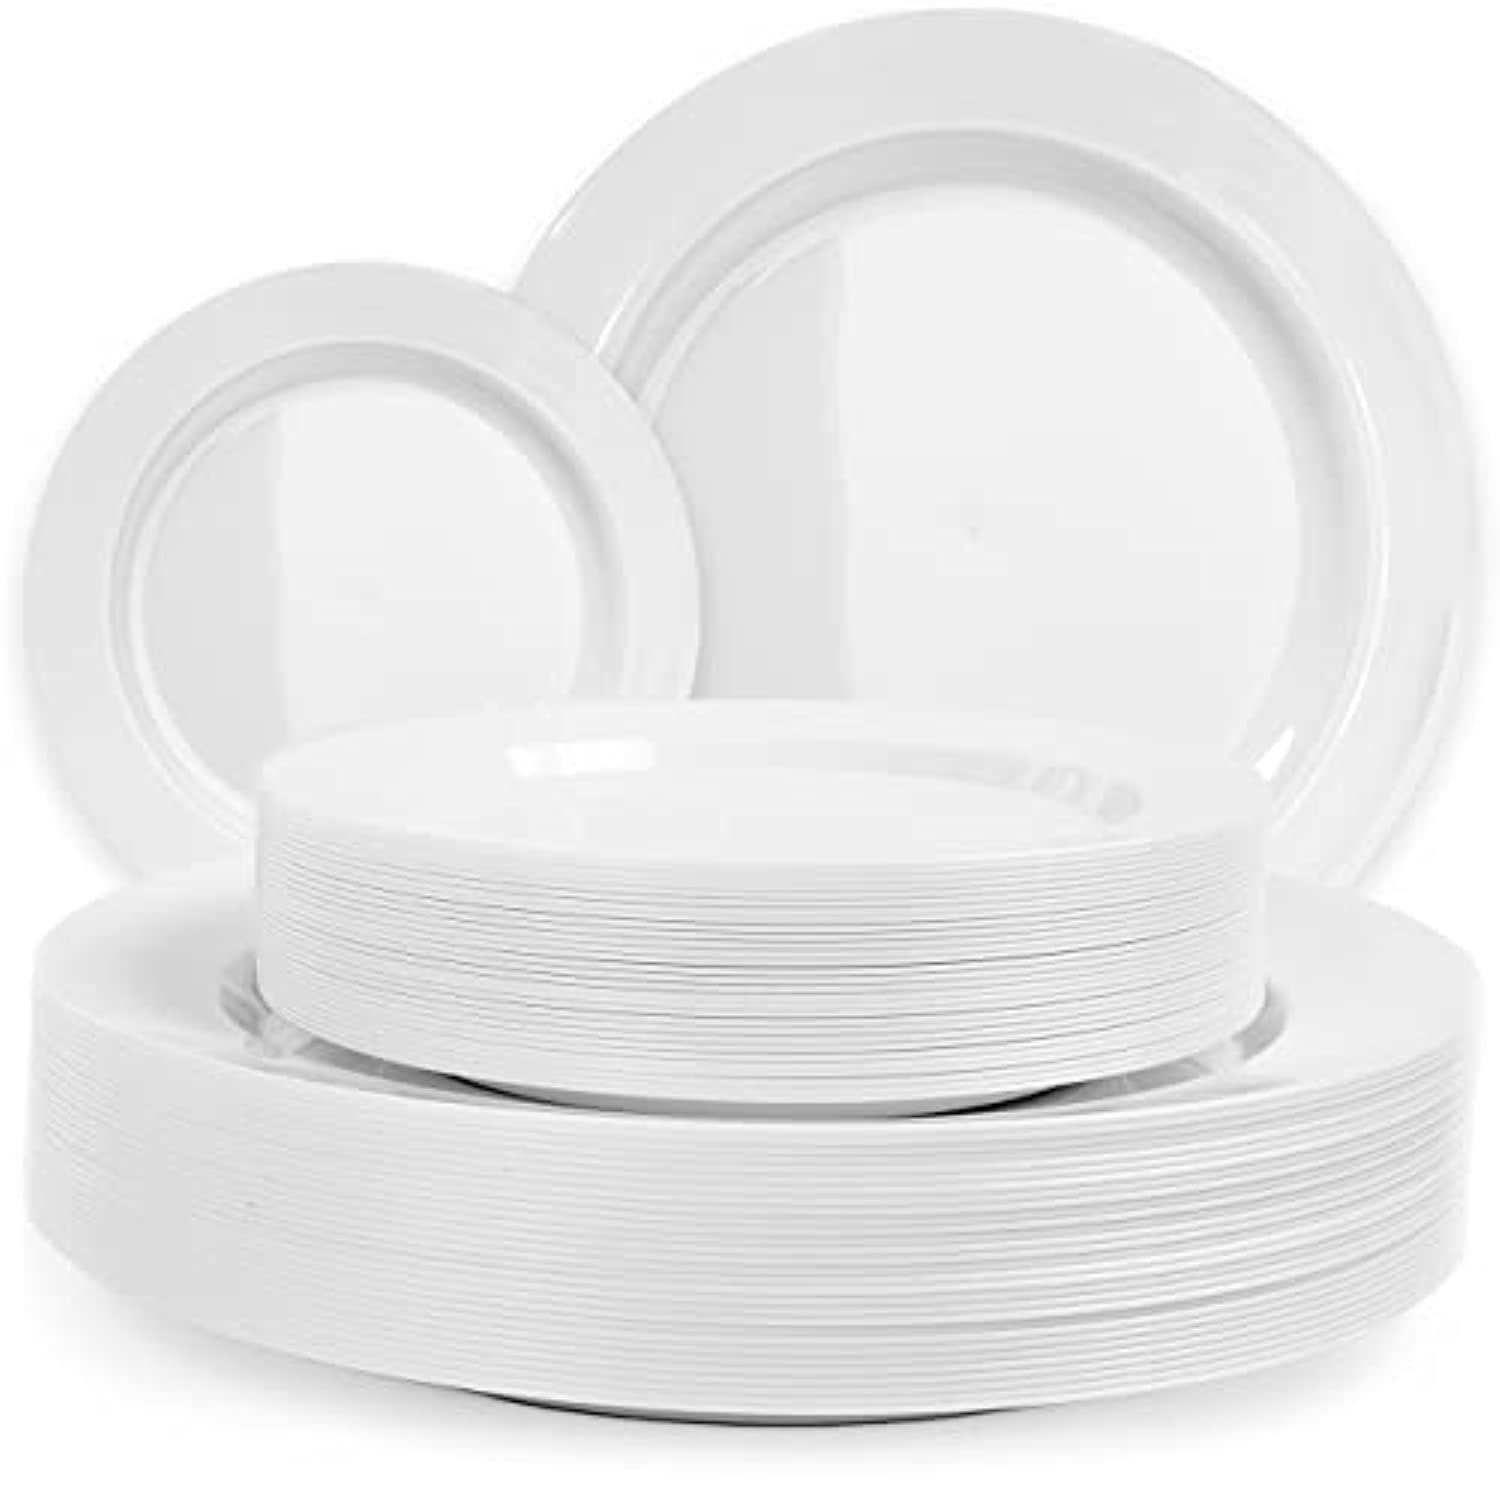 60 White Plastic Plates Disposable, Heavy Duty Plastic Plates for Party - 30 Dinner Plates 10.25" + 30 Salad Dessert Appetizer Plates 7.5", Premium Hard Party Plate Elegant Wedding Holidays Parties